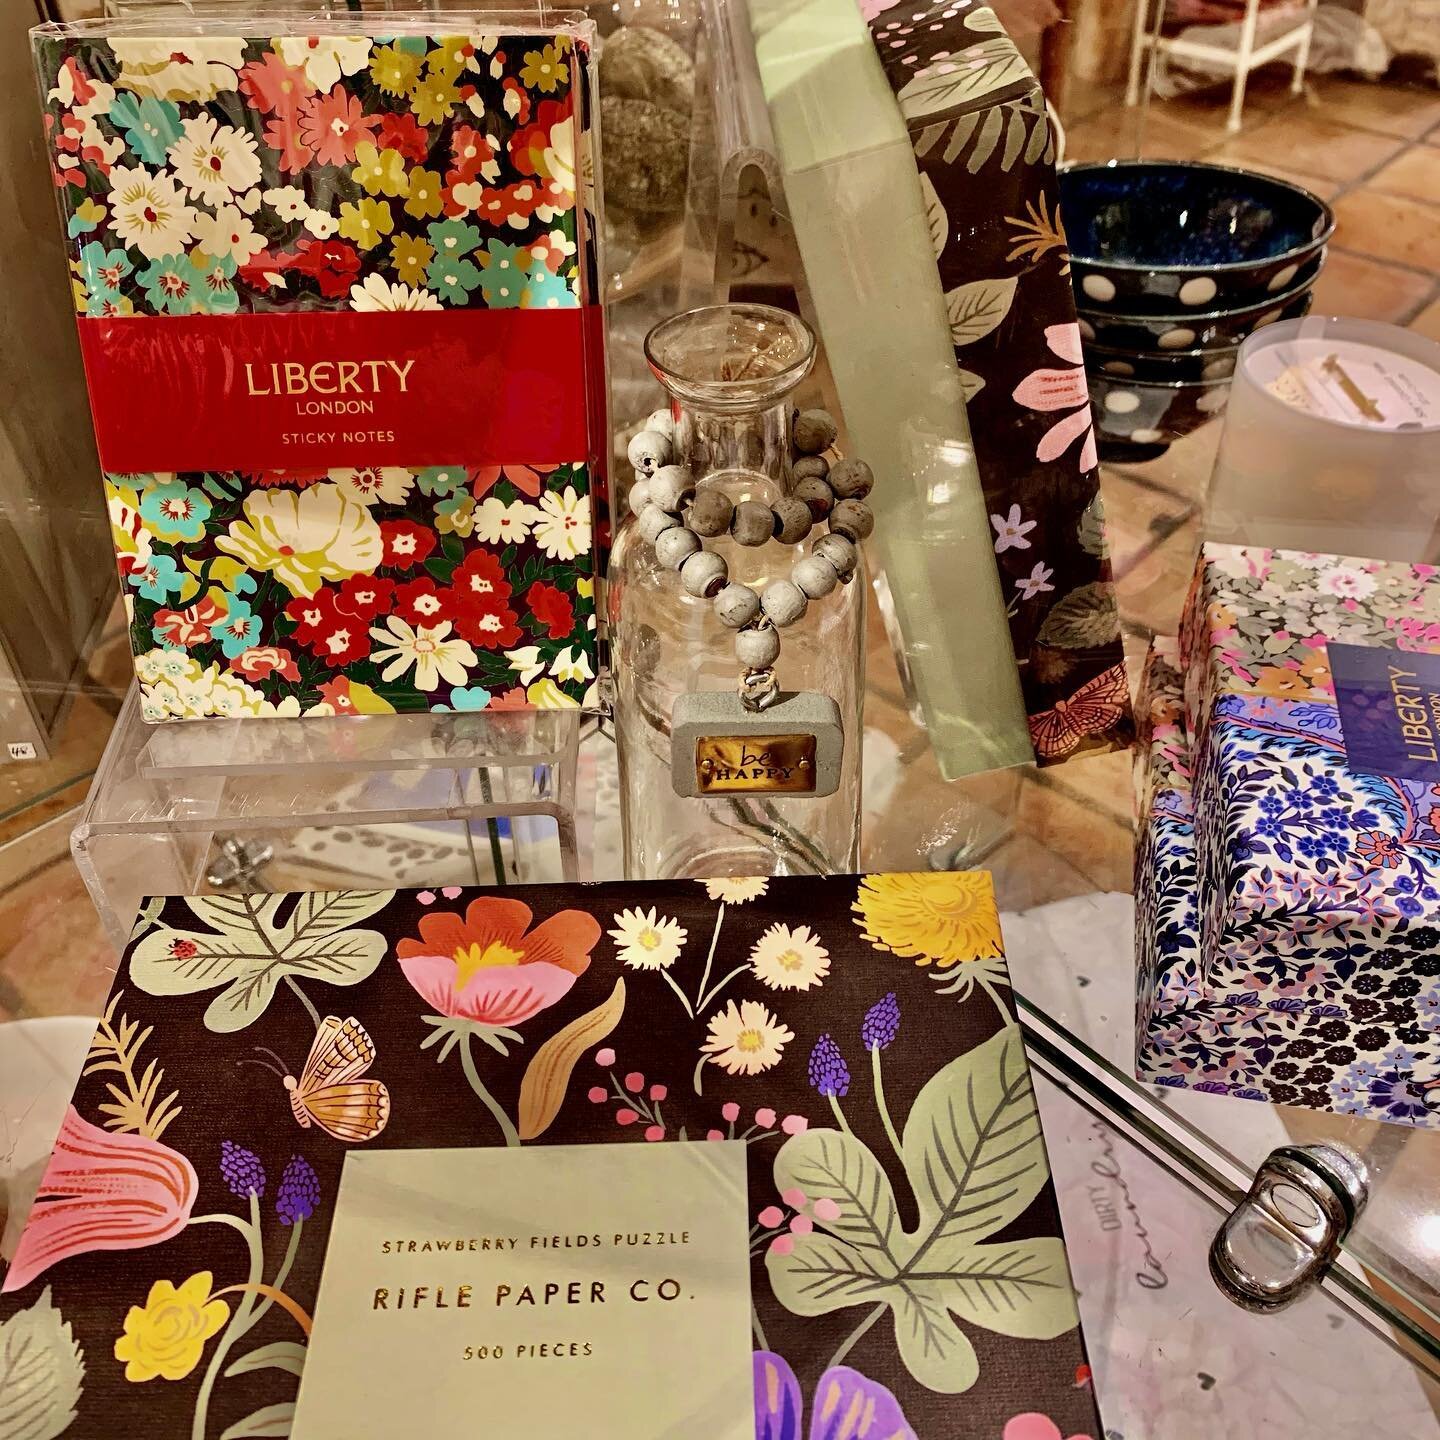 Feeling Floral🦋🌼🍄 #floralart #libertylondon #riflepaperco #puzzle #stickynotes #giftsforfriends #giftguide2021 #shopsmall #studiocitylife  #venturablvd